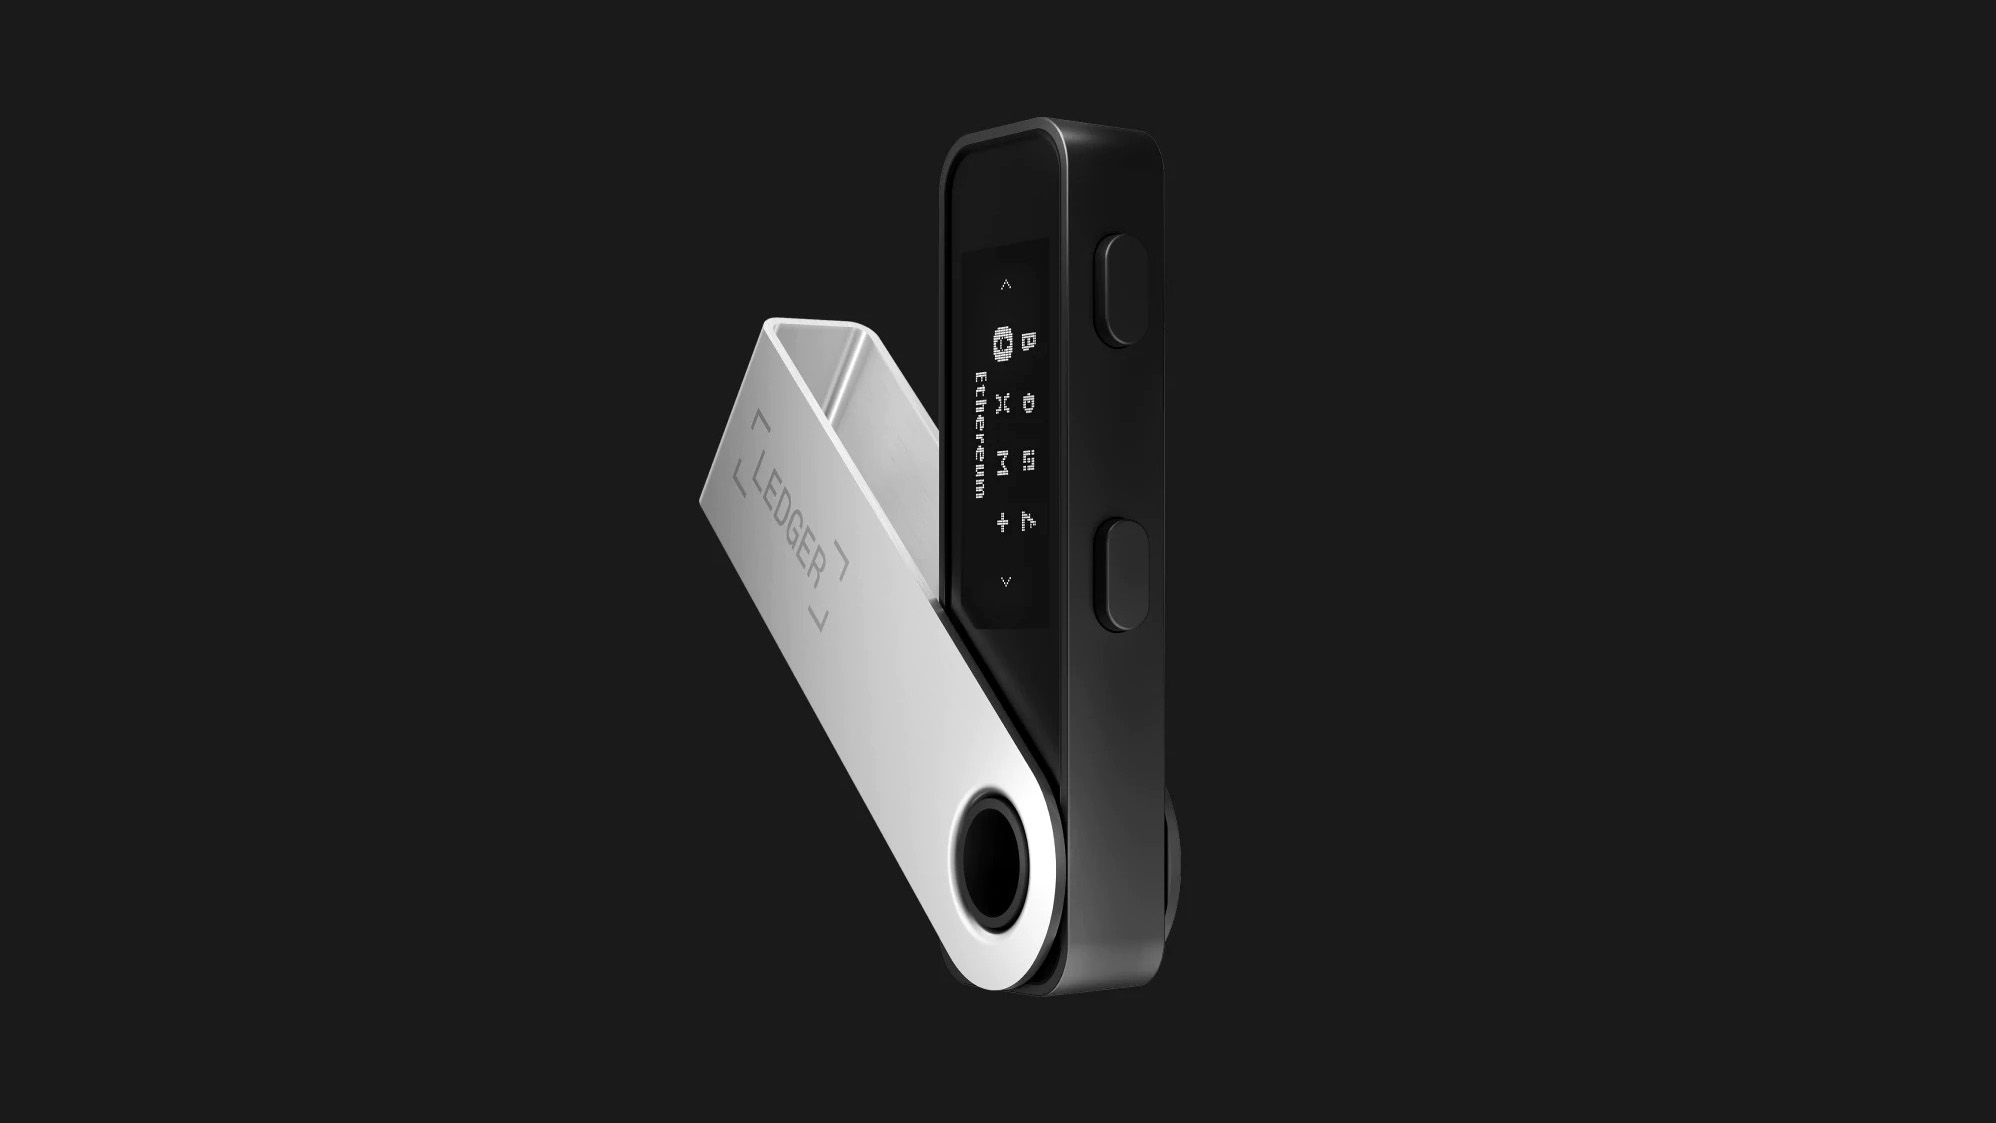 The new Ledger Nano S Plus crypto hardware wallet offers most Nano